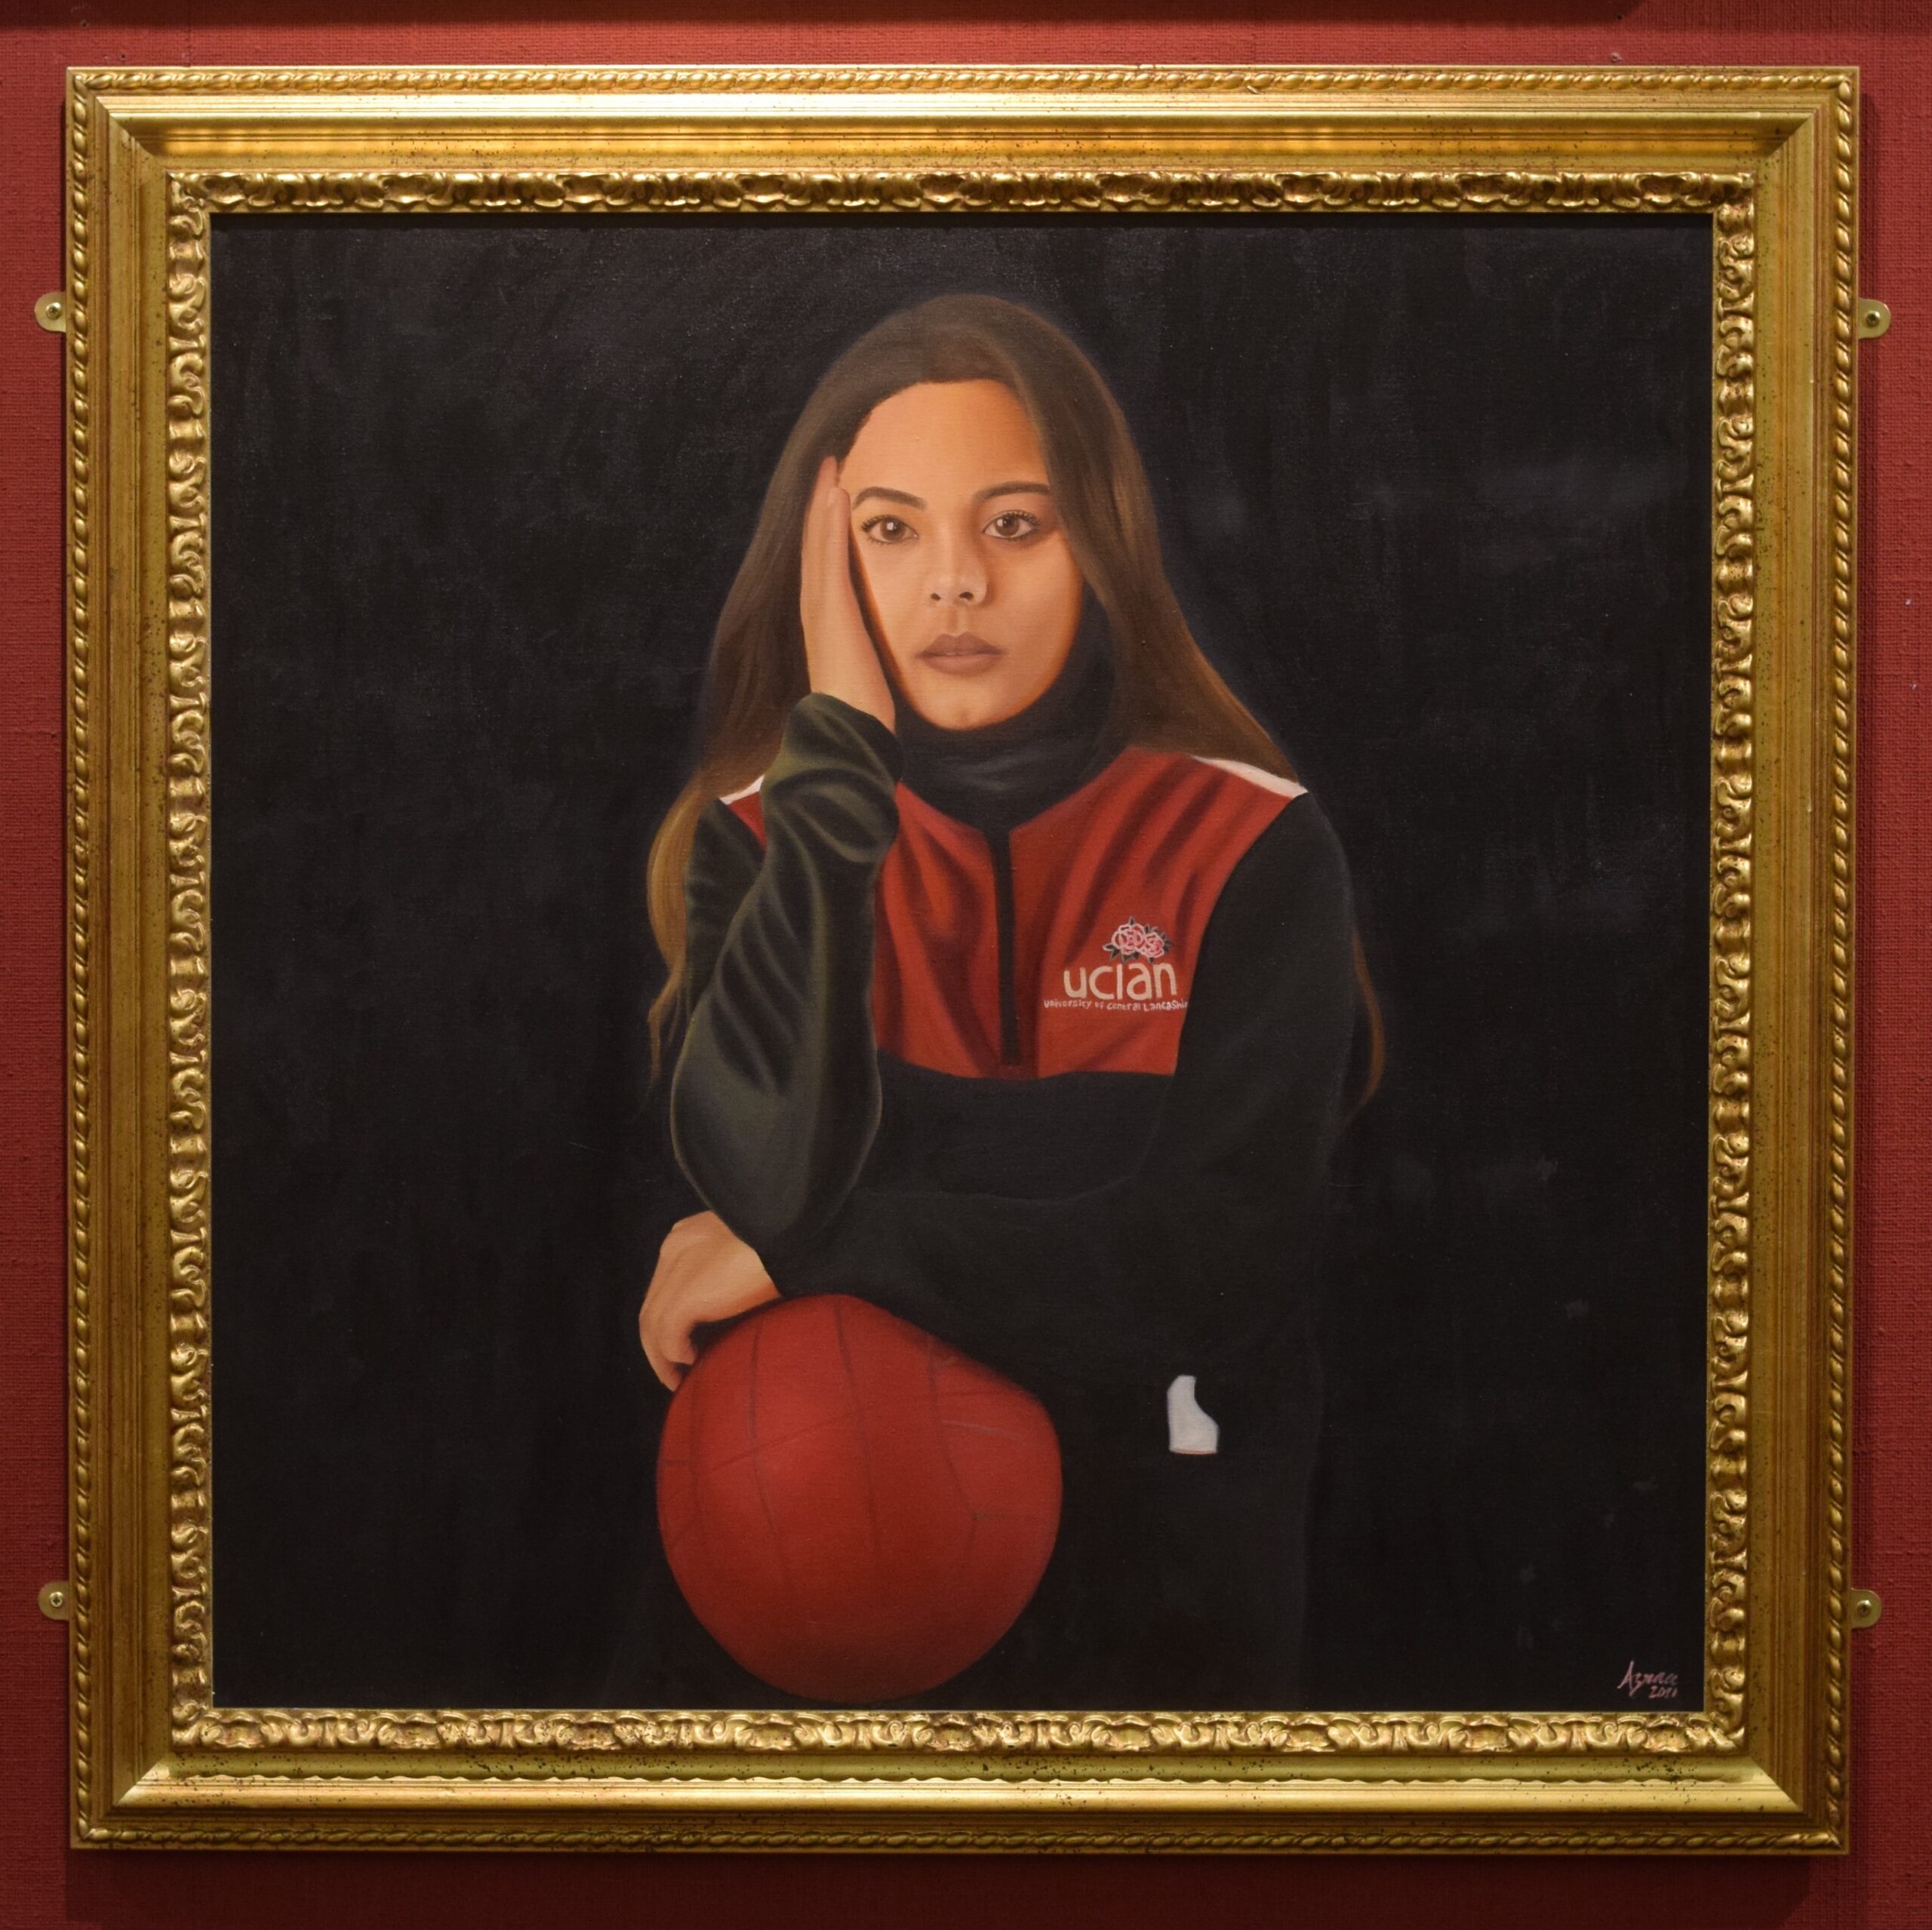 Image of a painting framed in gold of a person leaning on a ball wearing a UCLAN branded jacket.